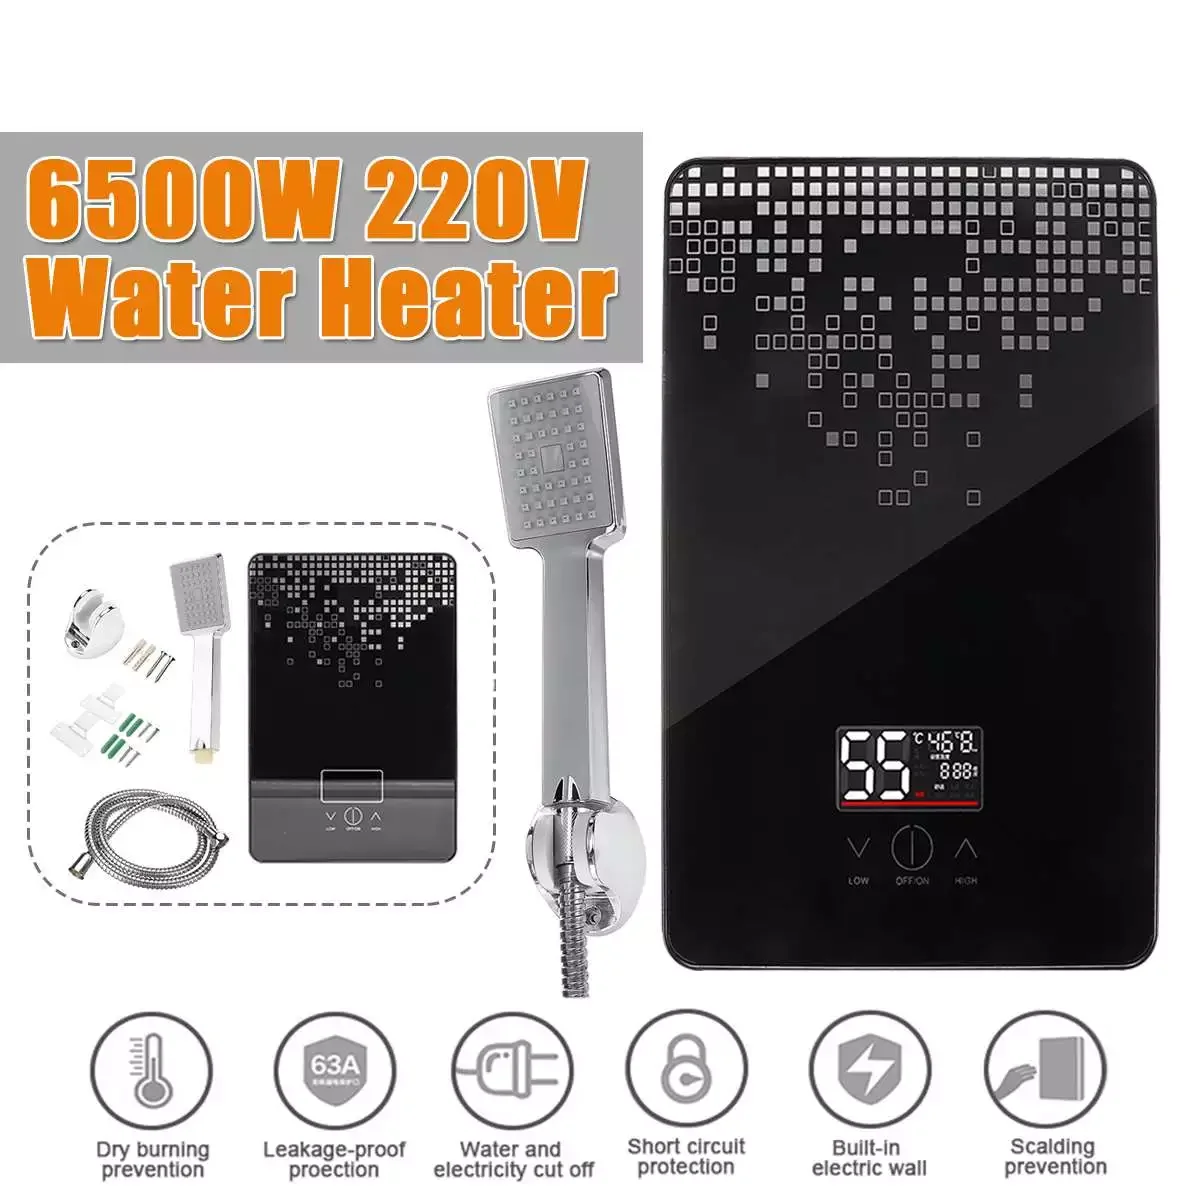 220V 6500W Electric Water Heater Instant Tankless Water Heater Bathroom Shower Multi-purpose Household Hot-Water Heater enlarge